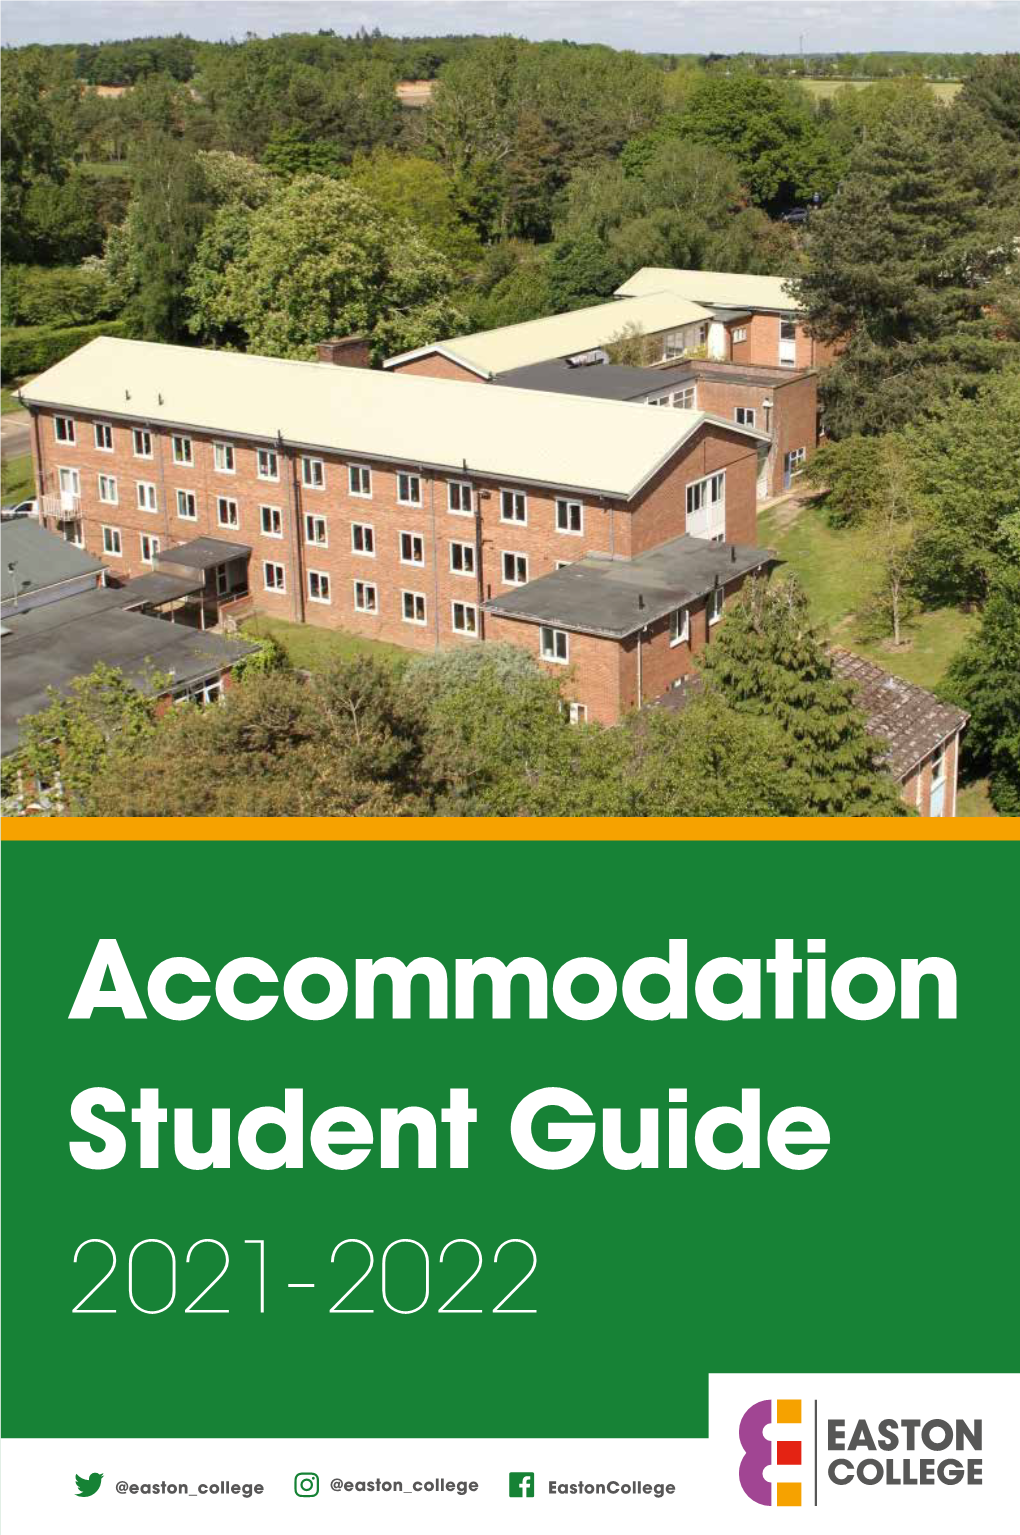 Accommodation Student Guide 2021-2022